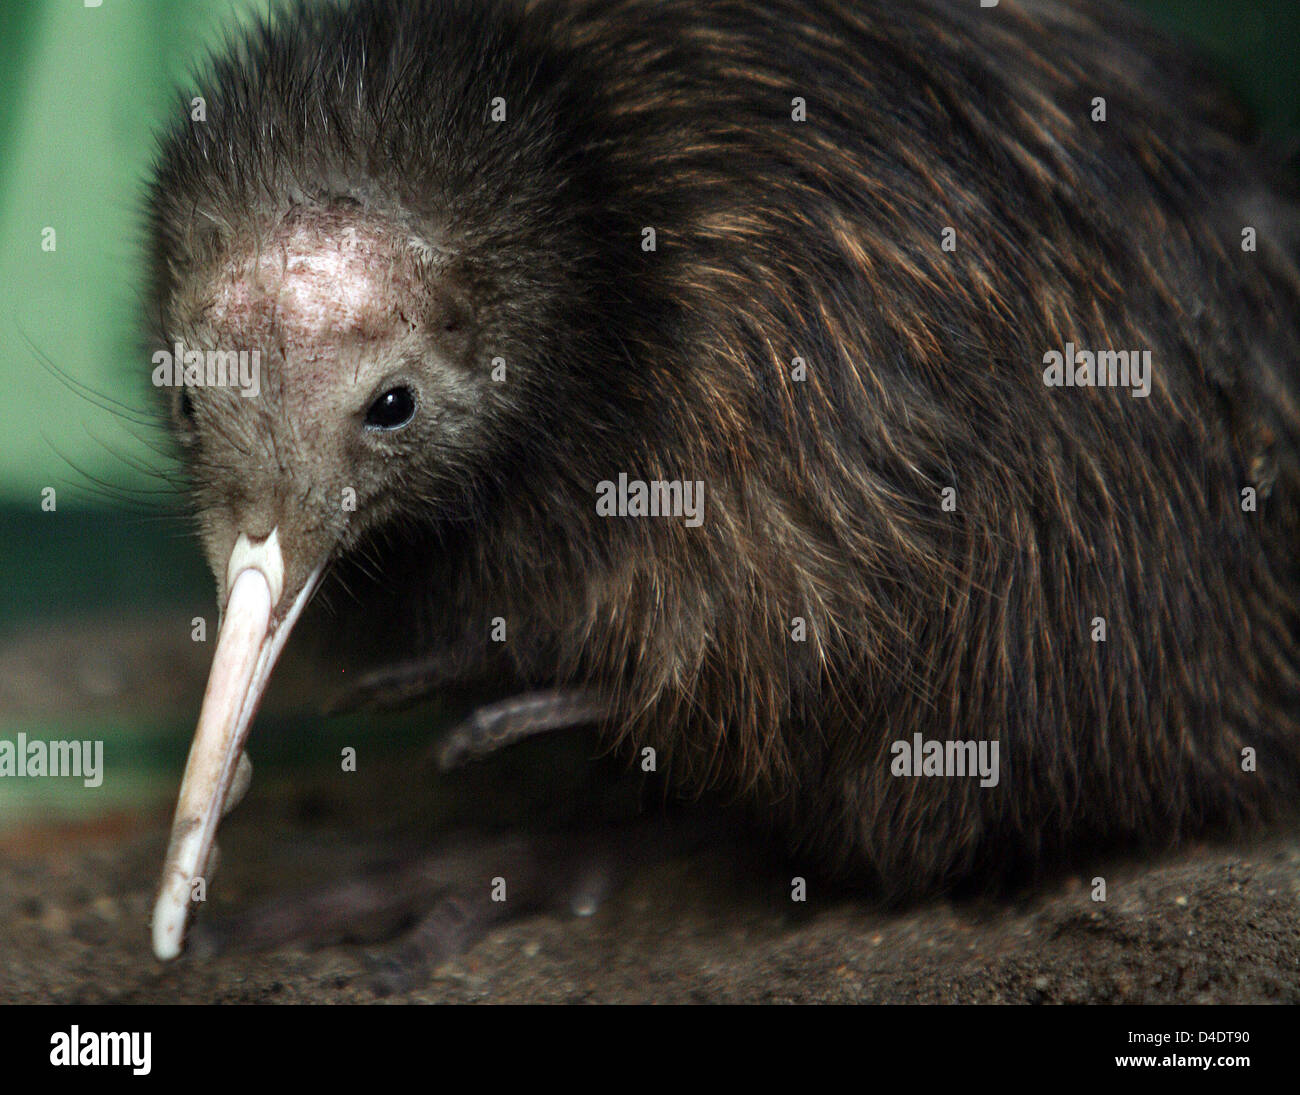 Little kiwi 'Claudius' pictured in its enclosure at the zoo of Berlin, Germany, 22 April 2008. The ratite unhatched on 26 March after 81 days of breeding with its father 'Erena'. Commonly the eggs of New Zealand's heraldic animal are breeded by man for most male kiwis behave agressively against their own breed and kill the unhatched. Photo: Patricia Driese Stock Photo